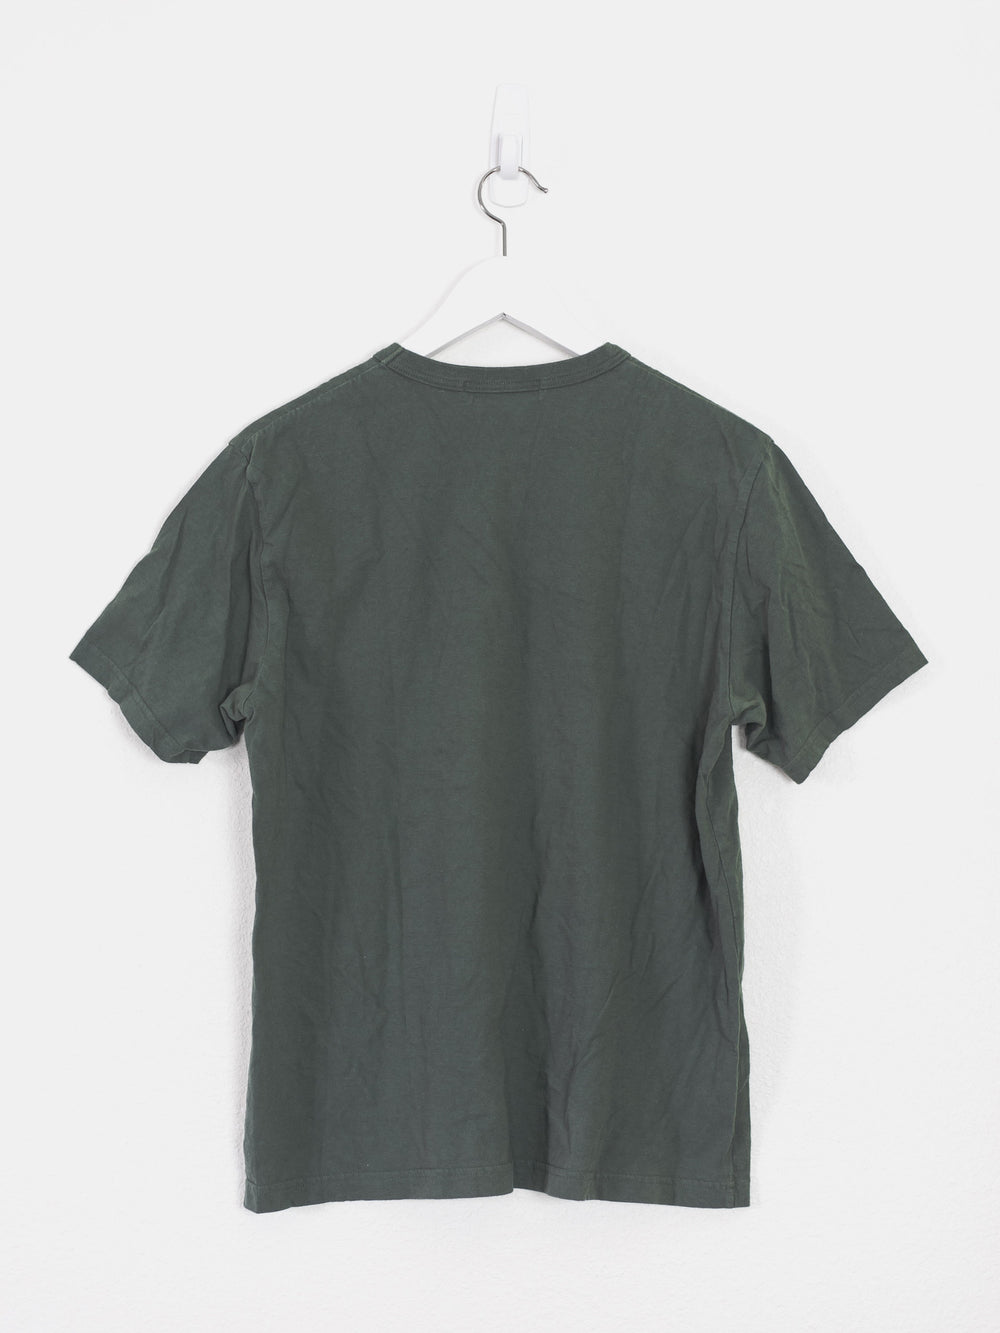 Undercover SS10 Dieter Rams TGraphics Tee